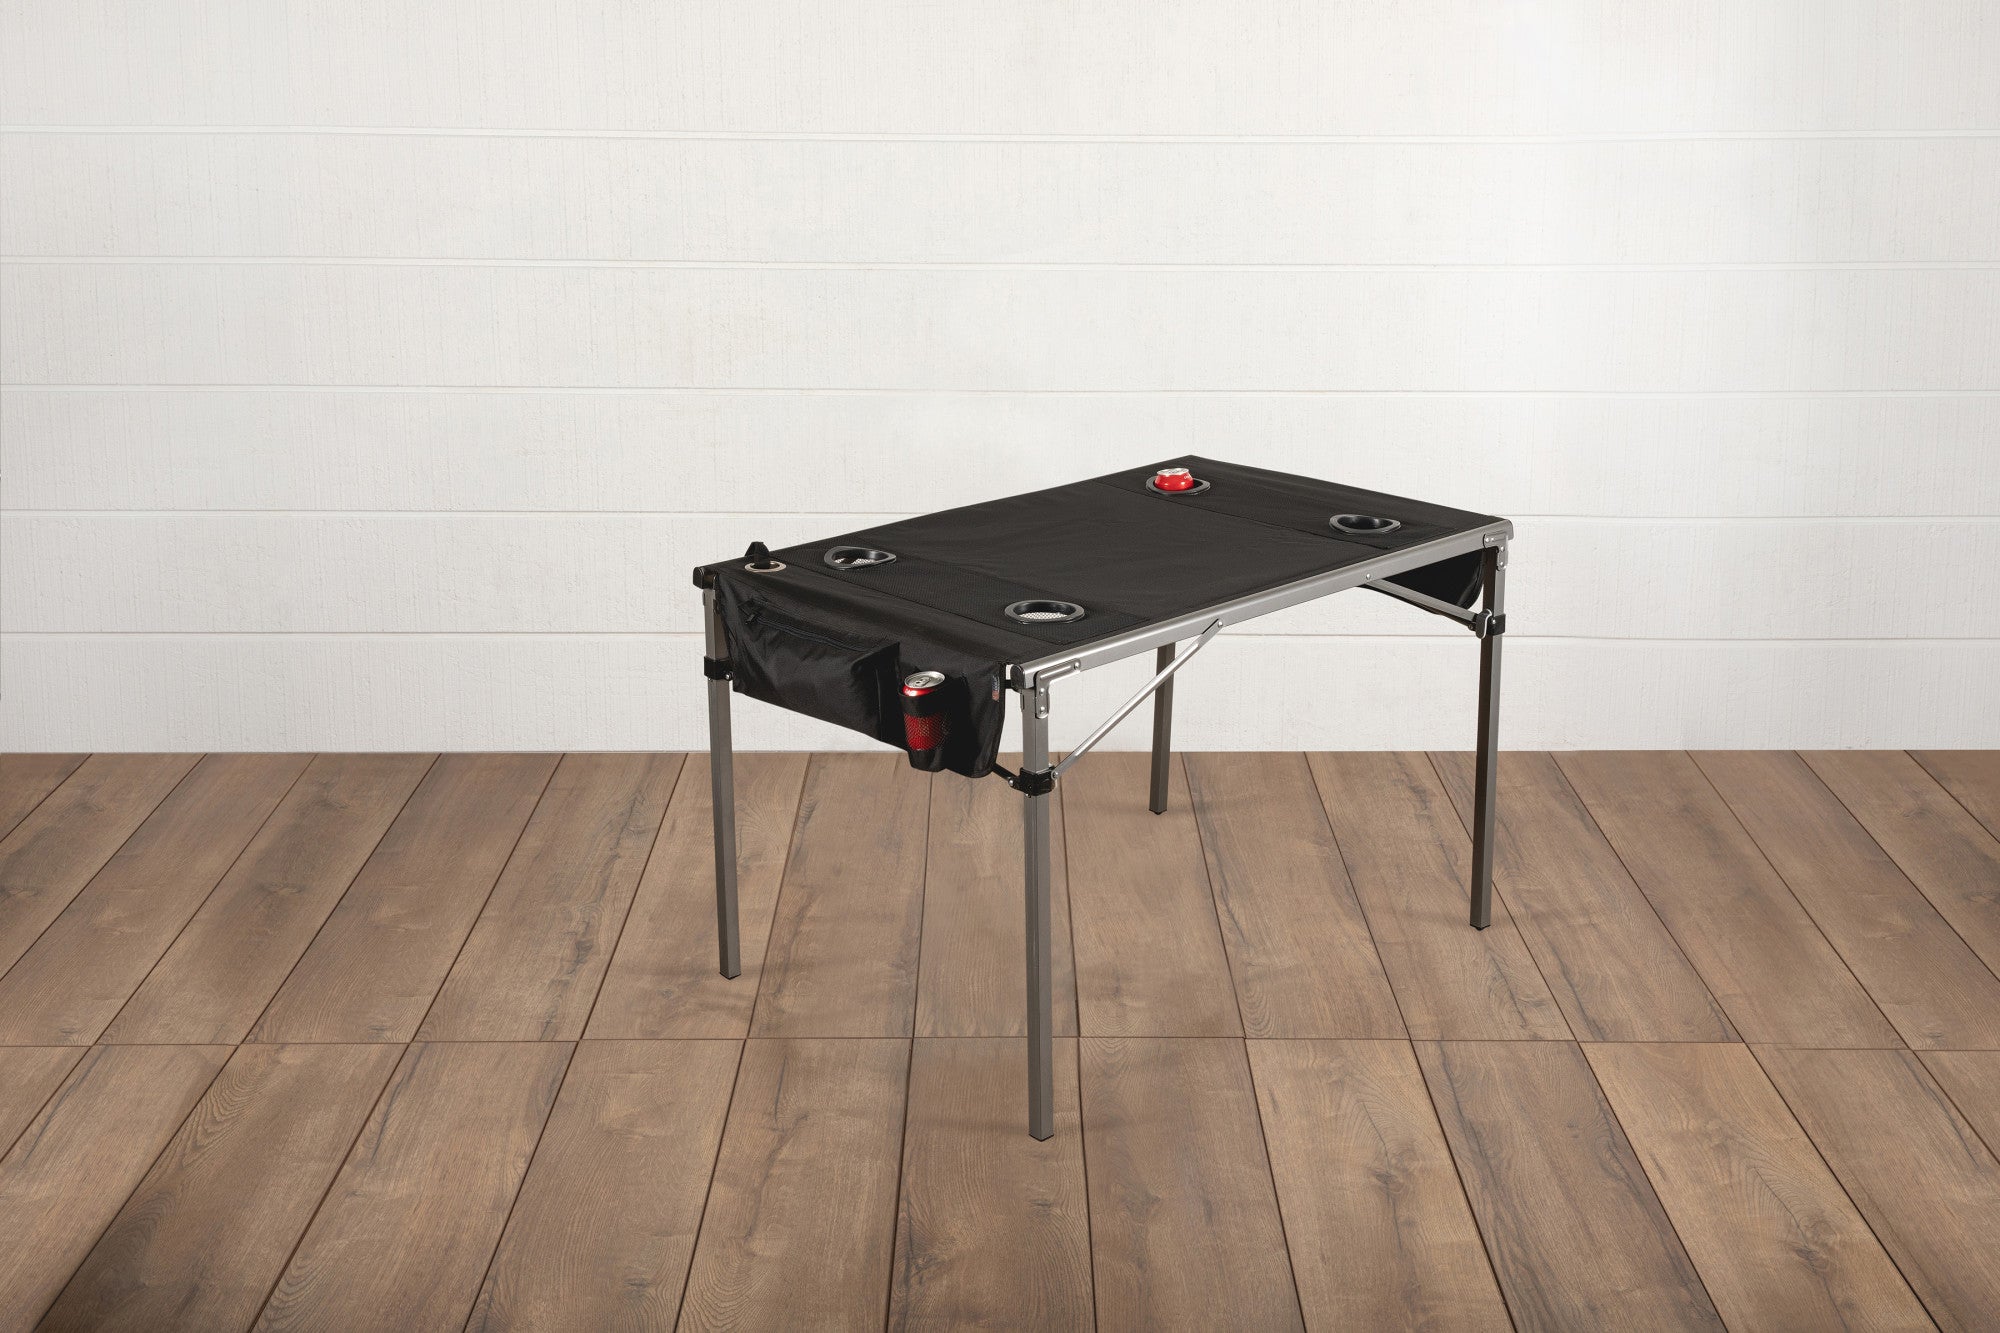 Cleveland Guardians - Travel Table Portable Folding Table